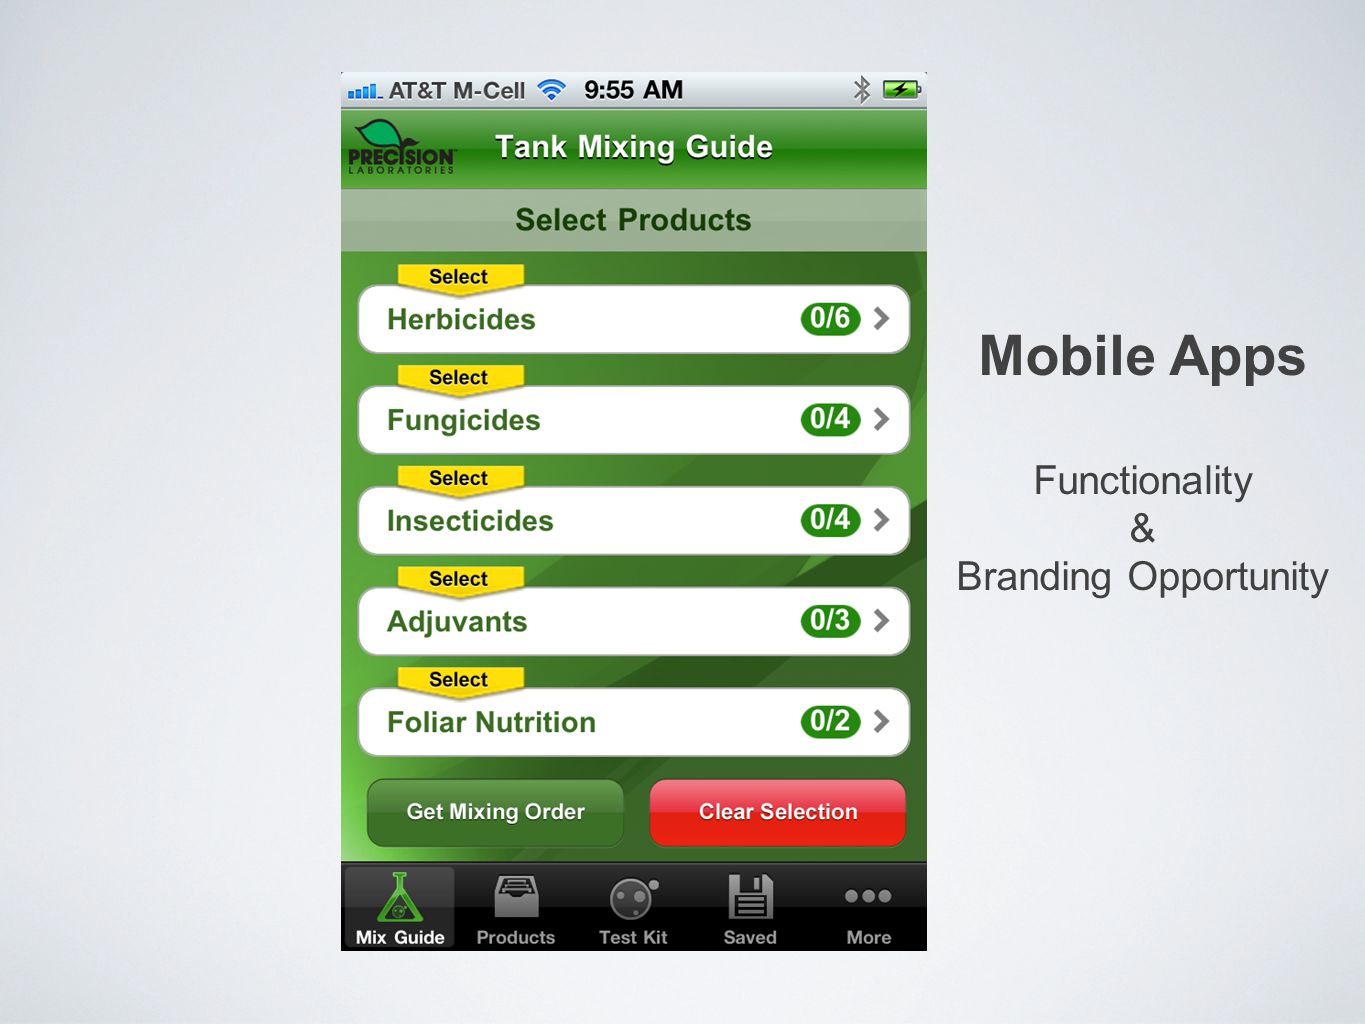 Mobile Apps Functionality & Branding Opportunity